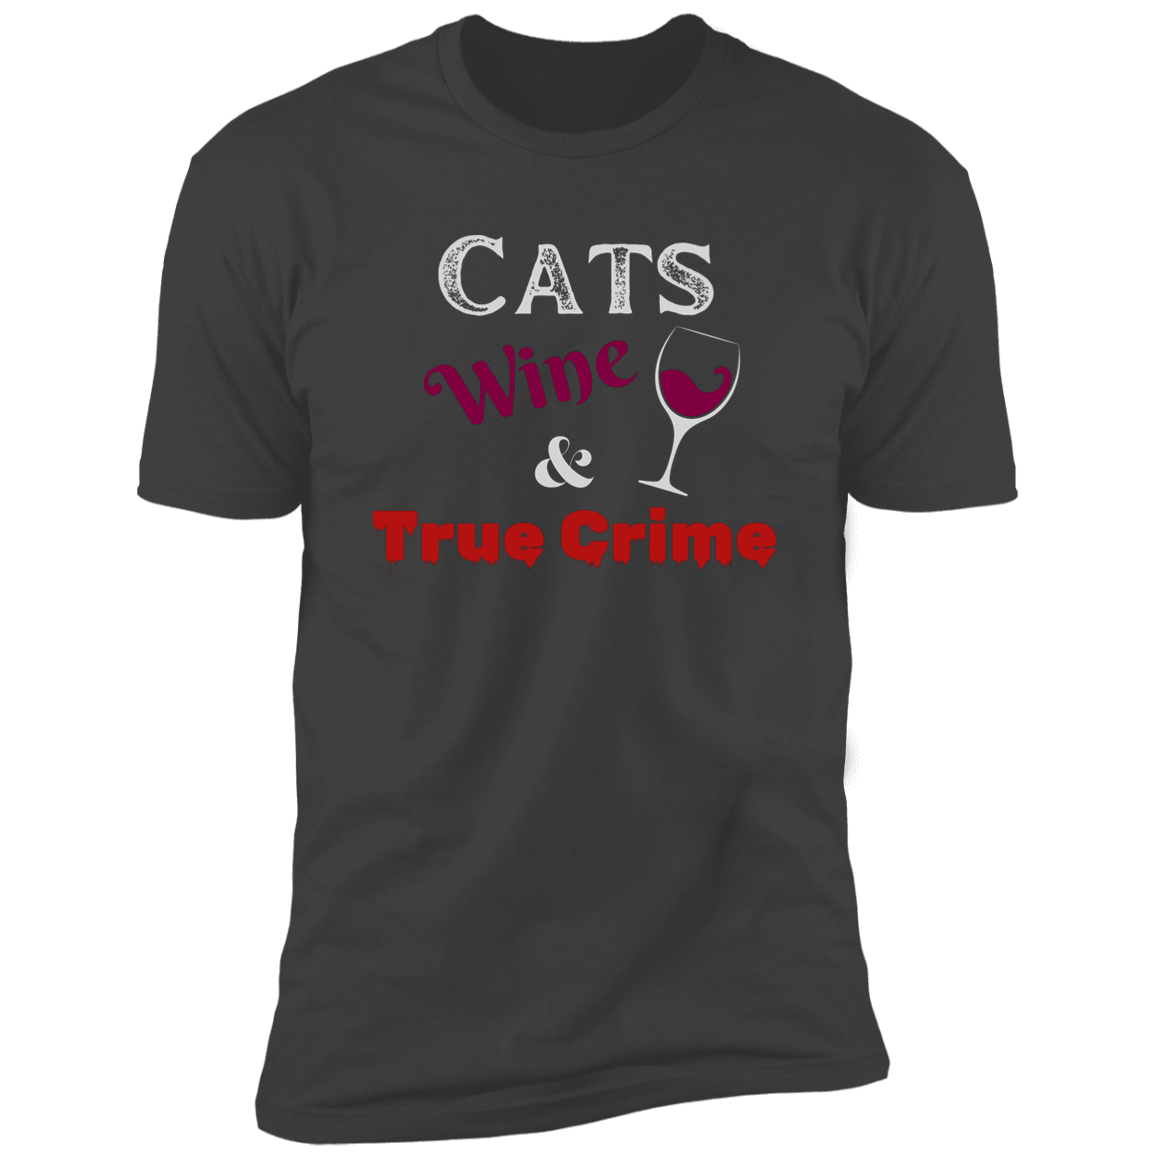 Cats Wine & True Crime T-shirt, Cat shirt for humans, funny cat shirt, in heavy metal gray